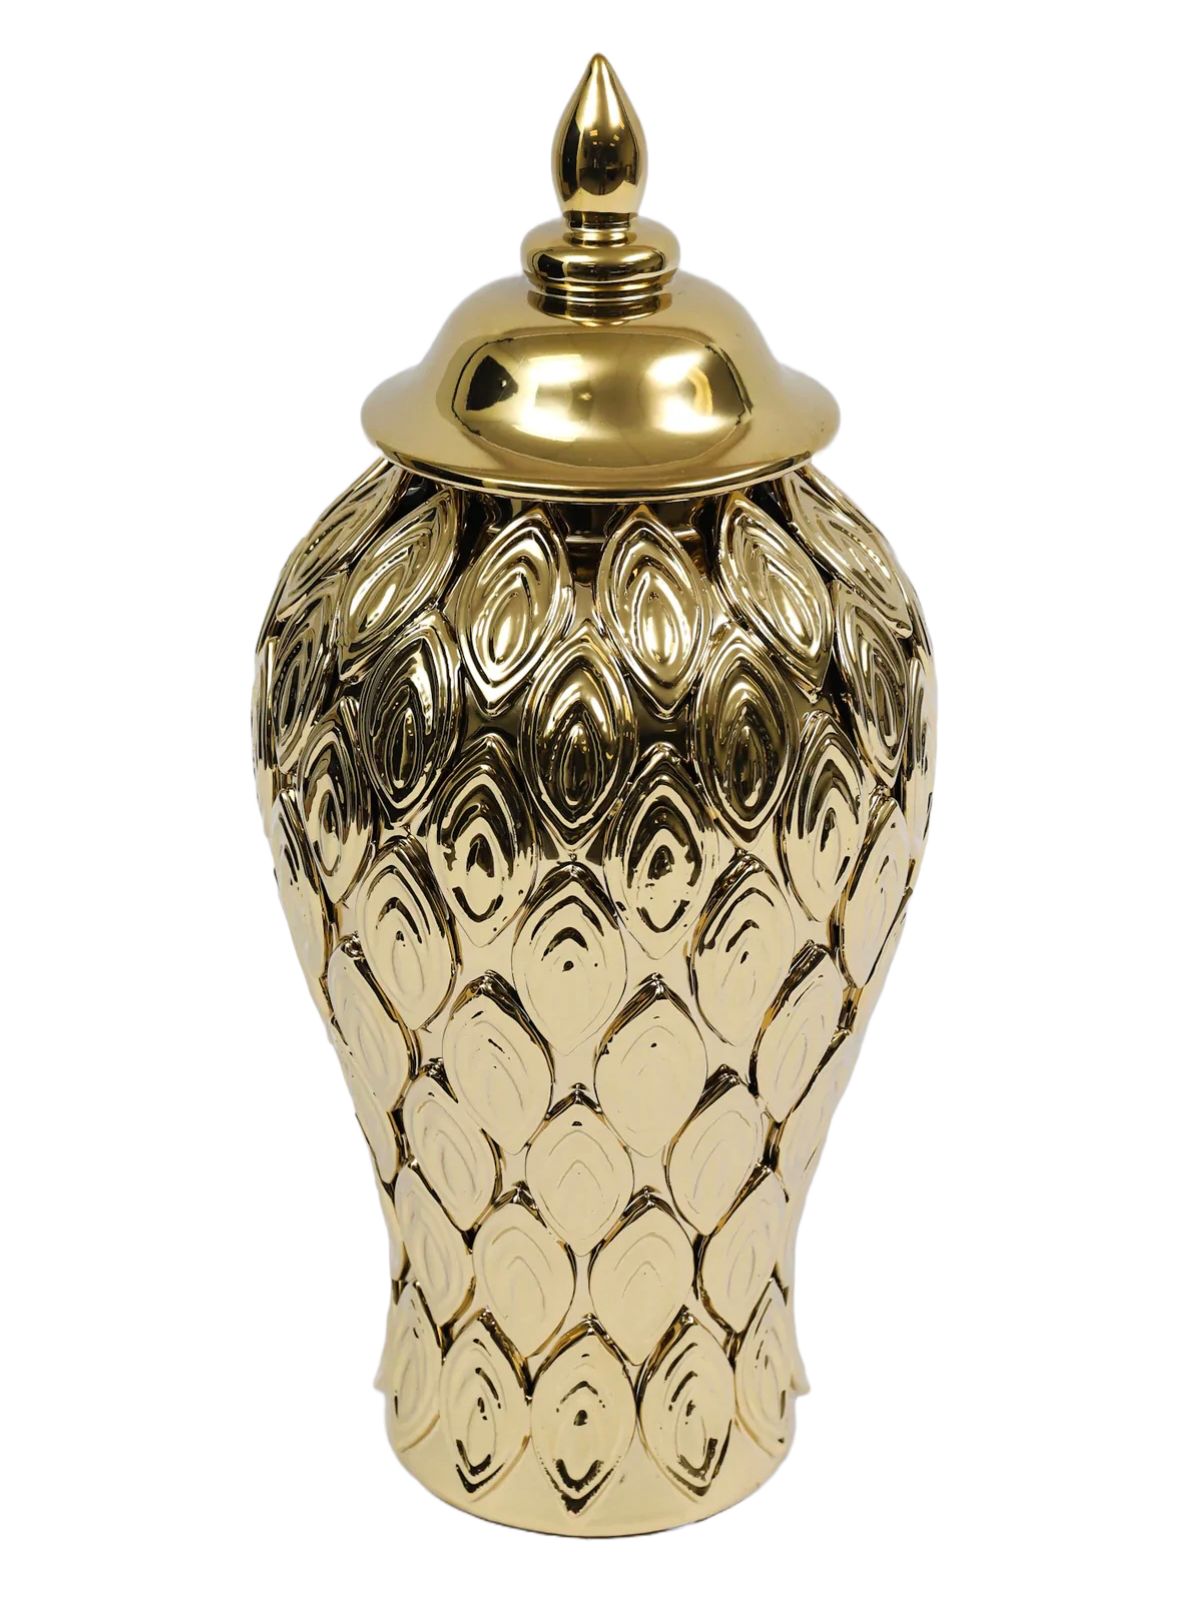 24H Gold Ceramic Ginger Jar With Gold Flower Petals and Removable Lid. Sold by KYA Home Decor.